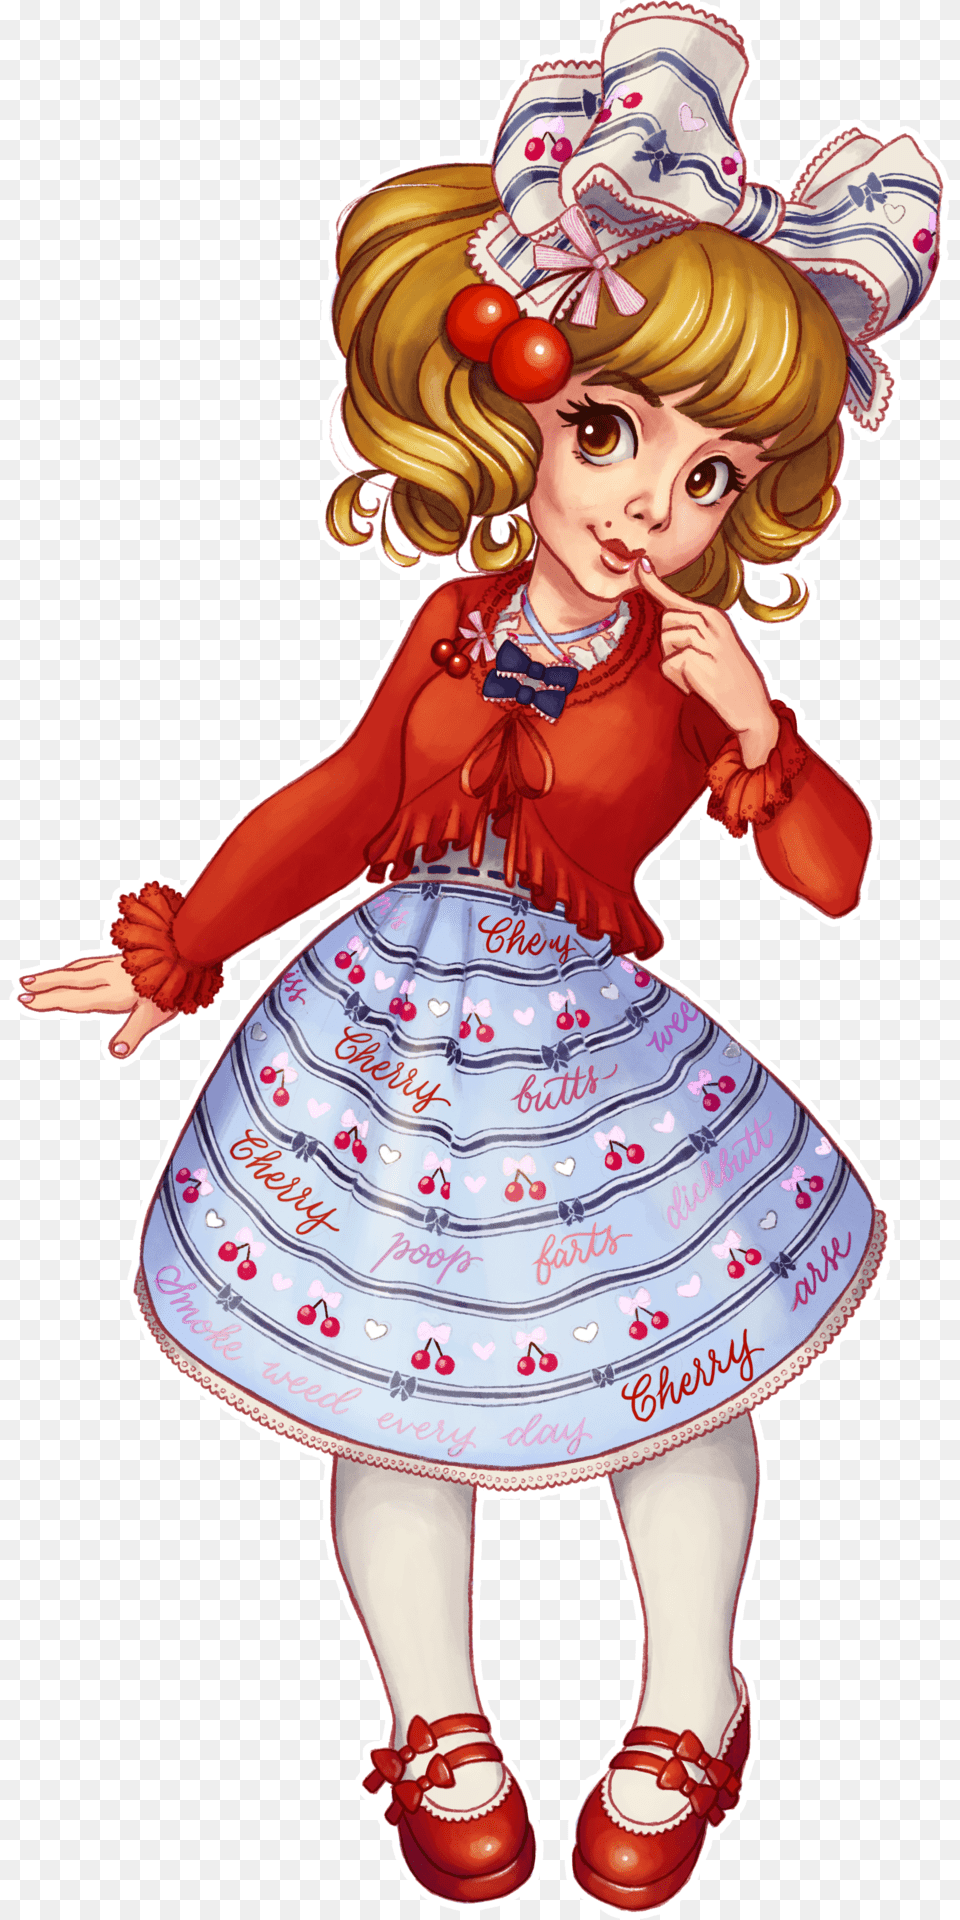 My Friend Ali In One Of Her Lolita Fashion Coordinates Cartoon, Child, Female, Person, Girl Free Png